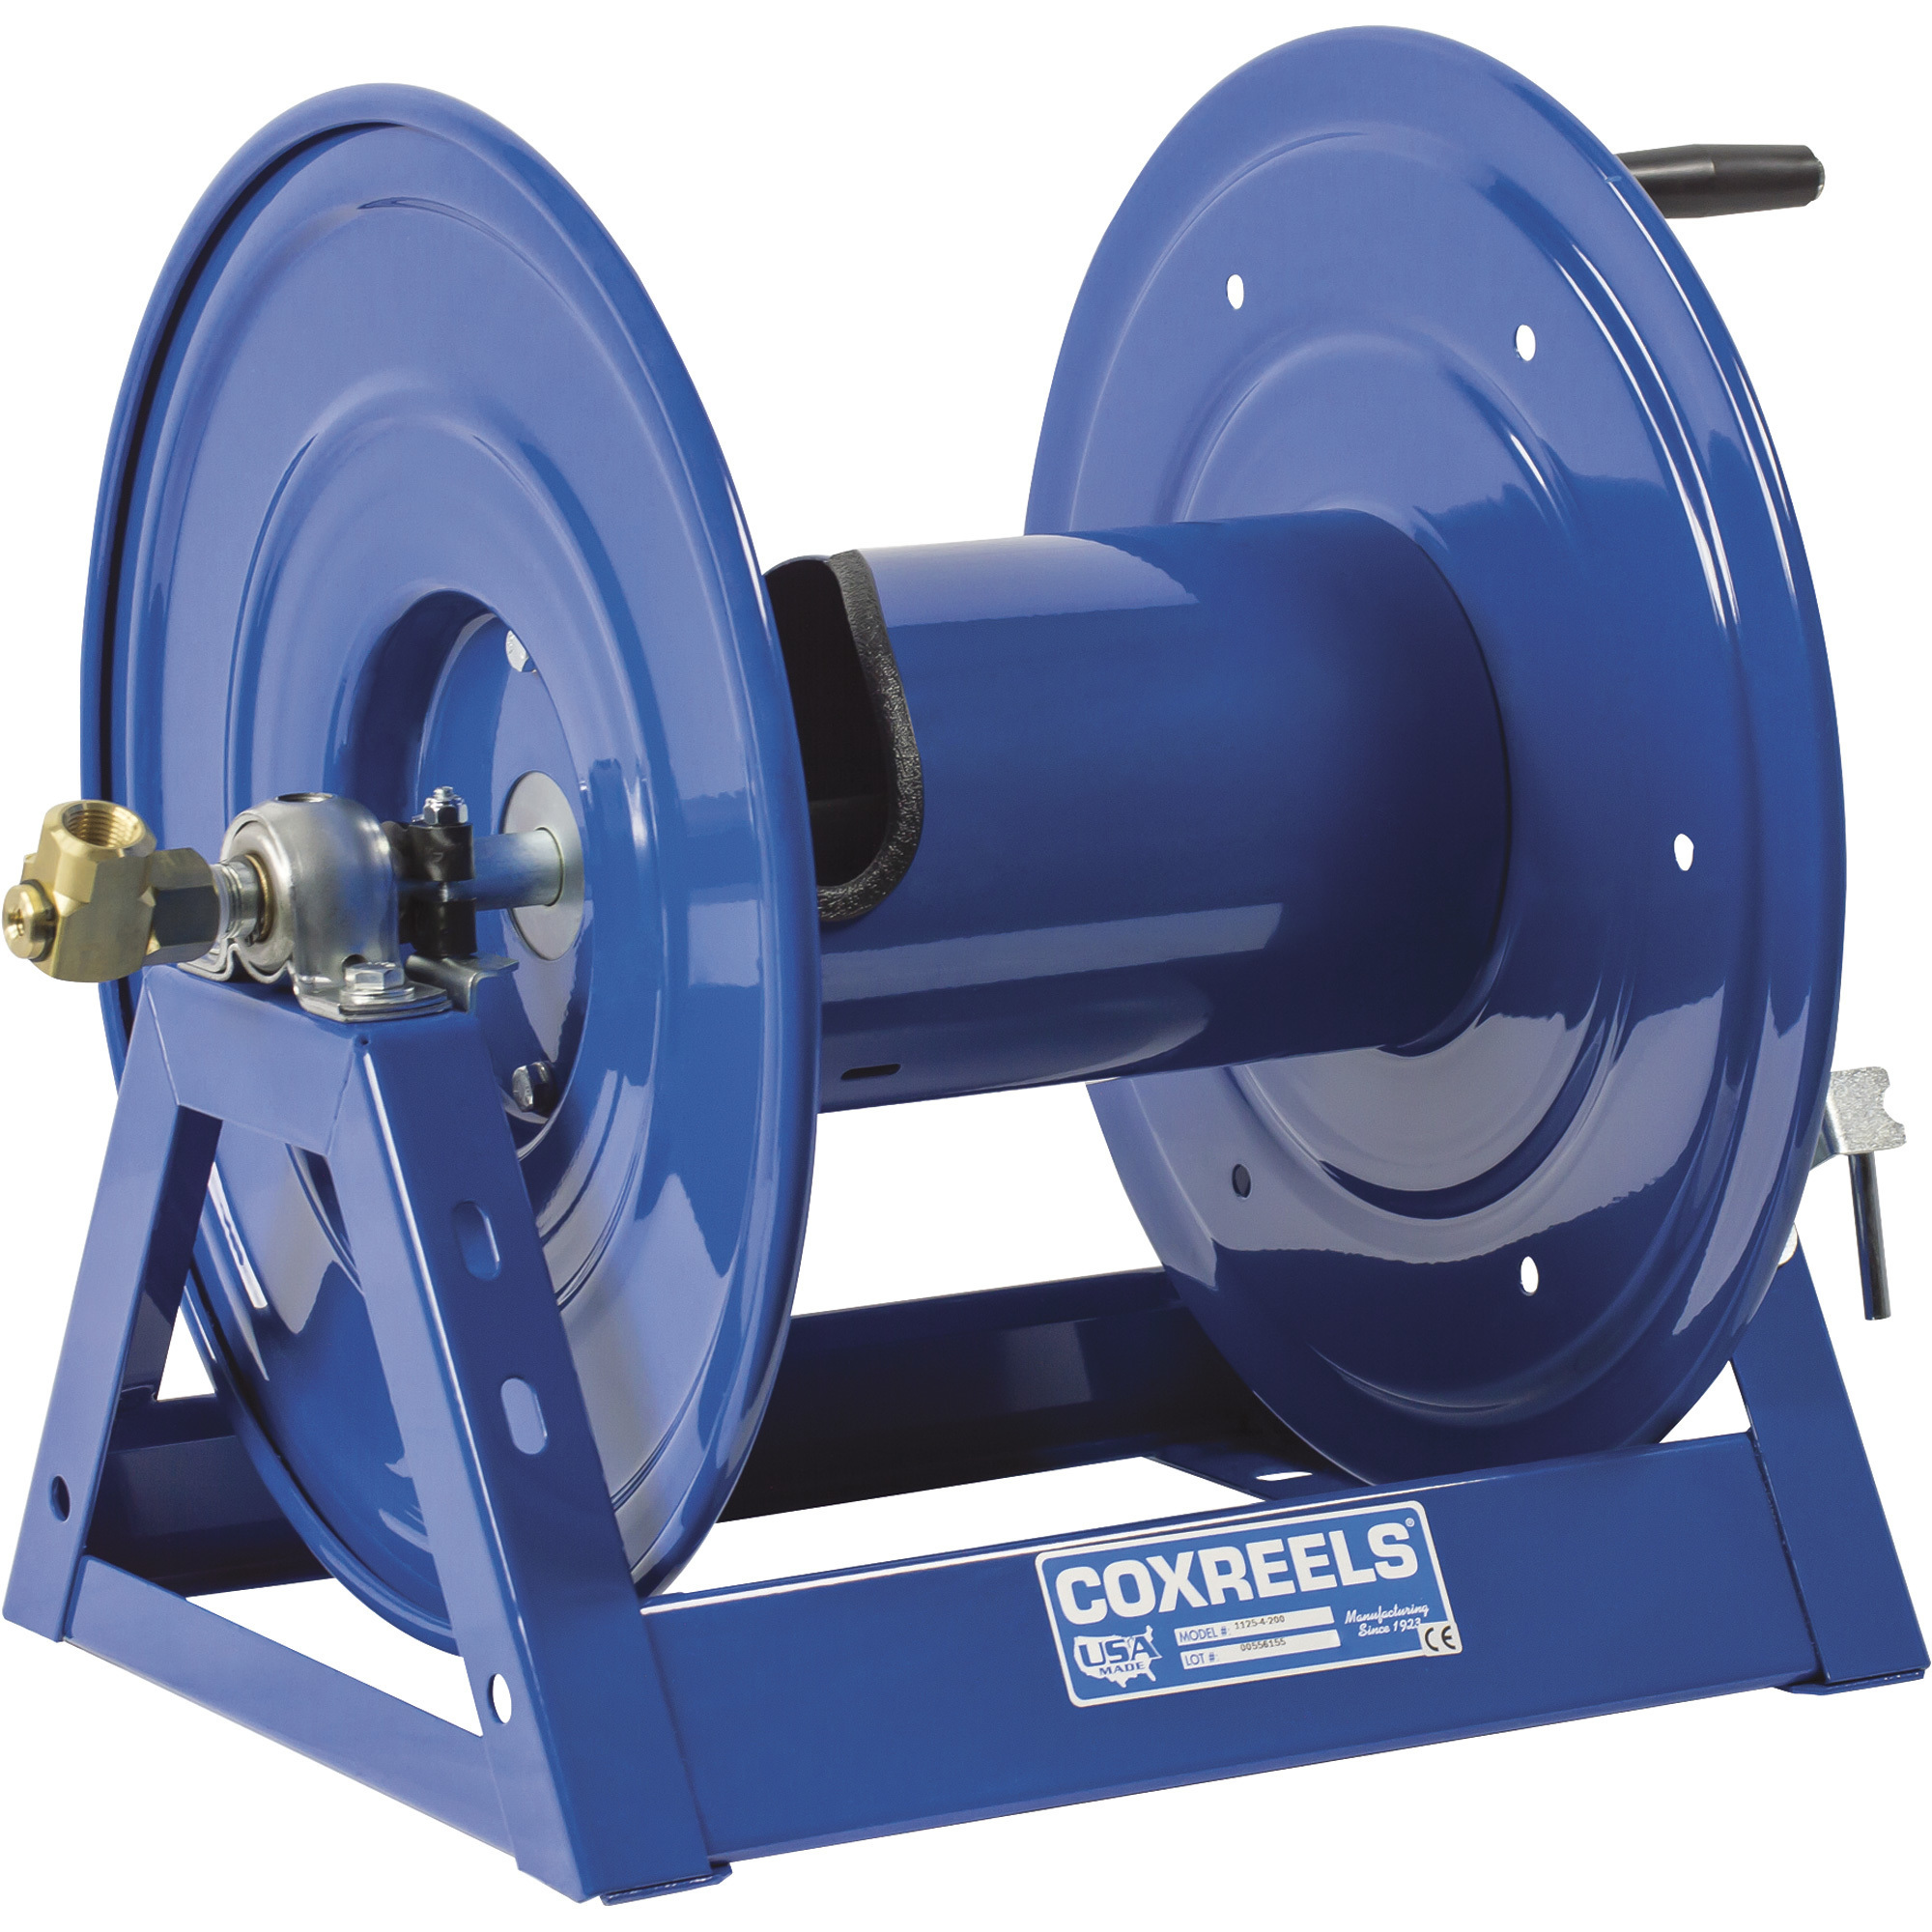 Coxreels Pressure Washer Hose Reel -3000 psi, 300ft. x 1/2in. Capacity, Model#1125-4-200-BVXX